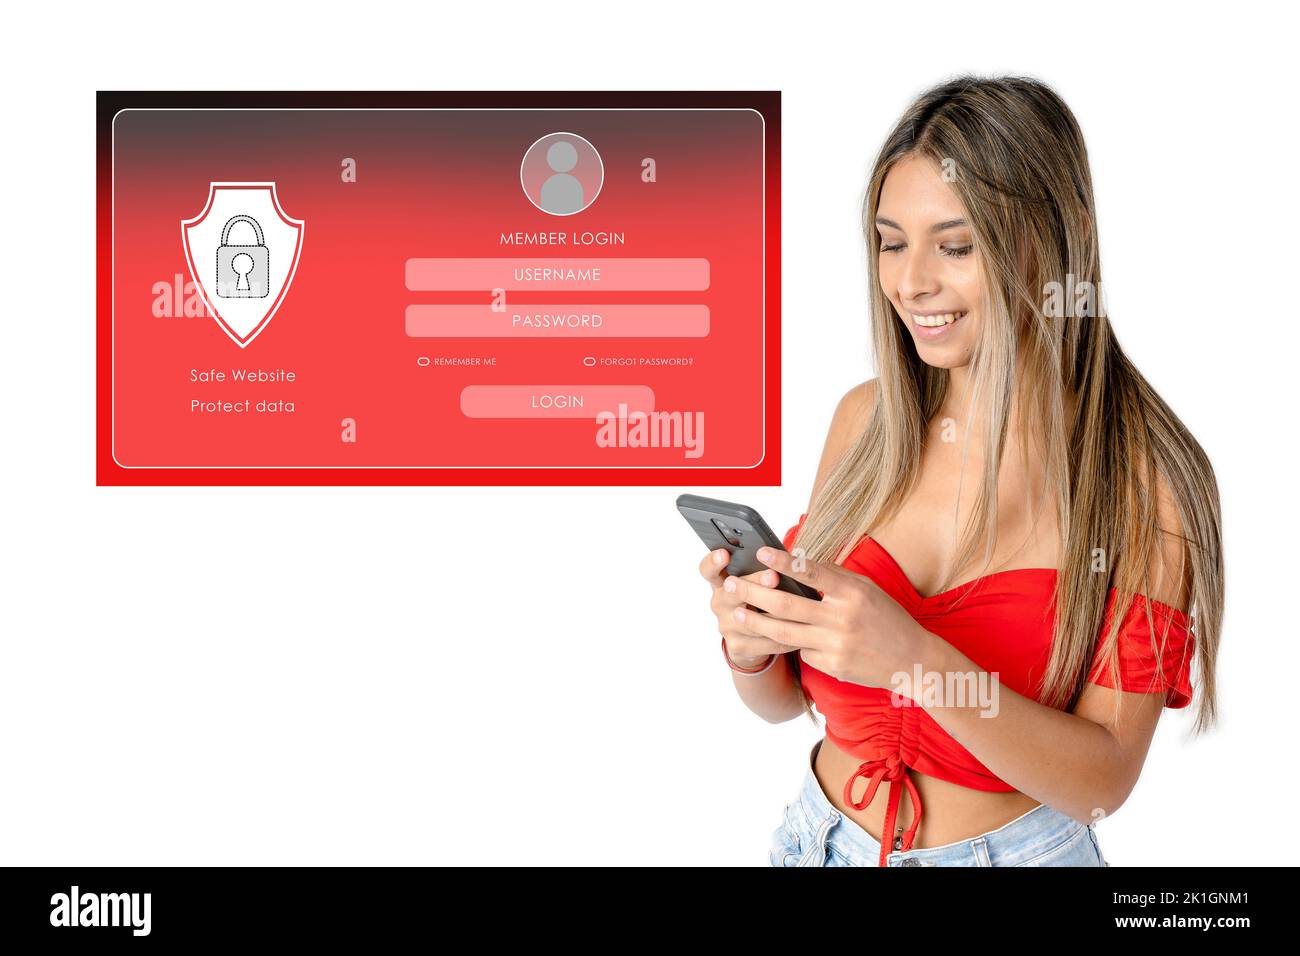 Beautiful latina woman entering a website. The login screen is represented floating in front and red background. White background, copy space. Stock Photo